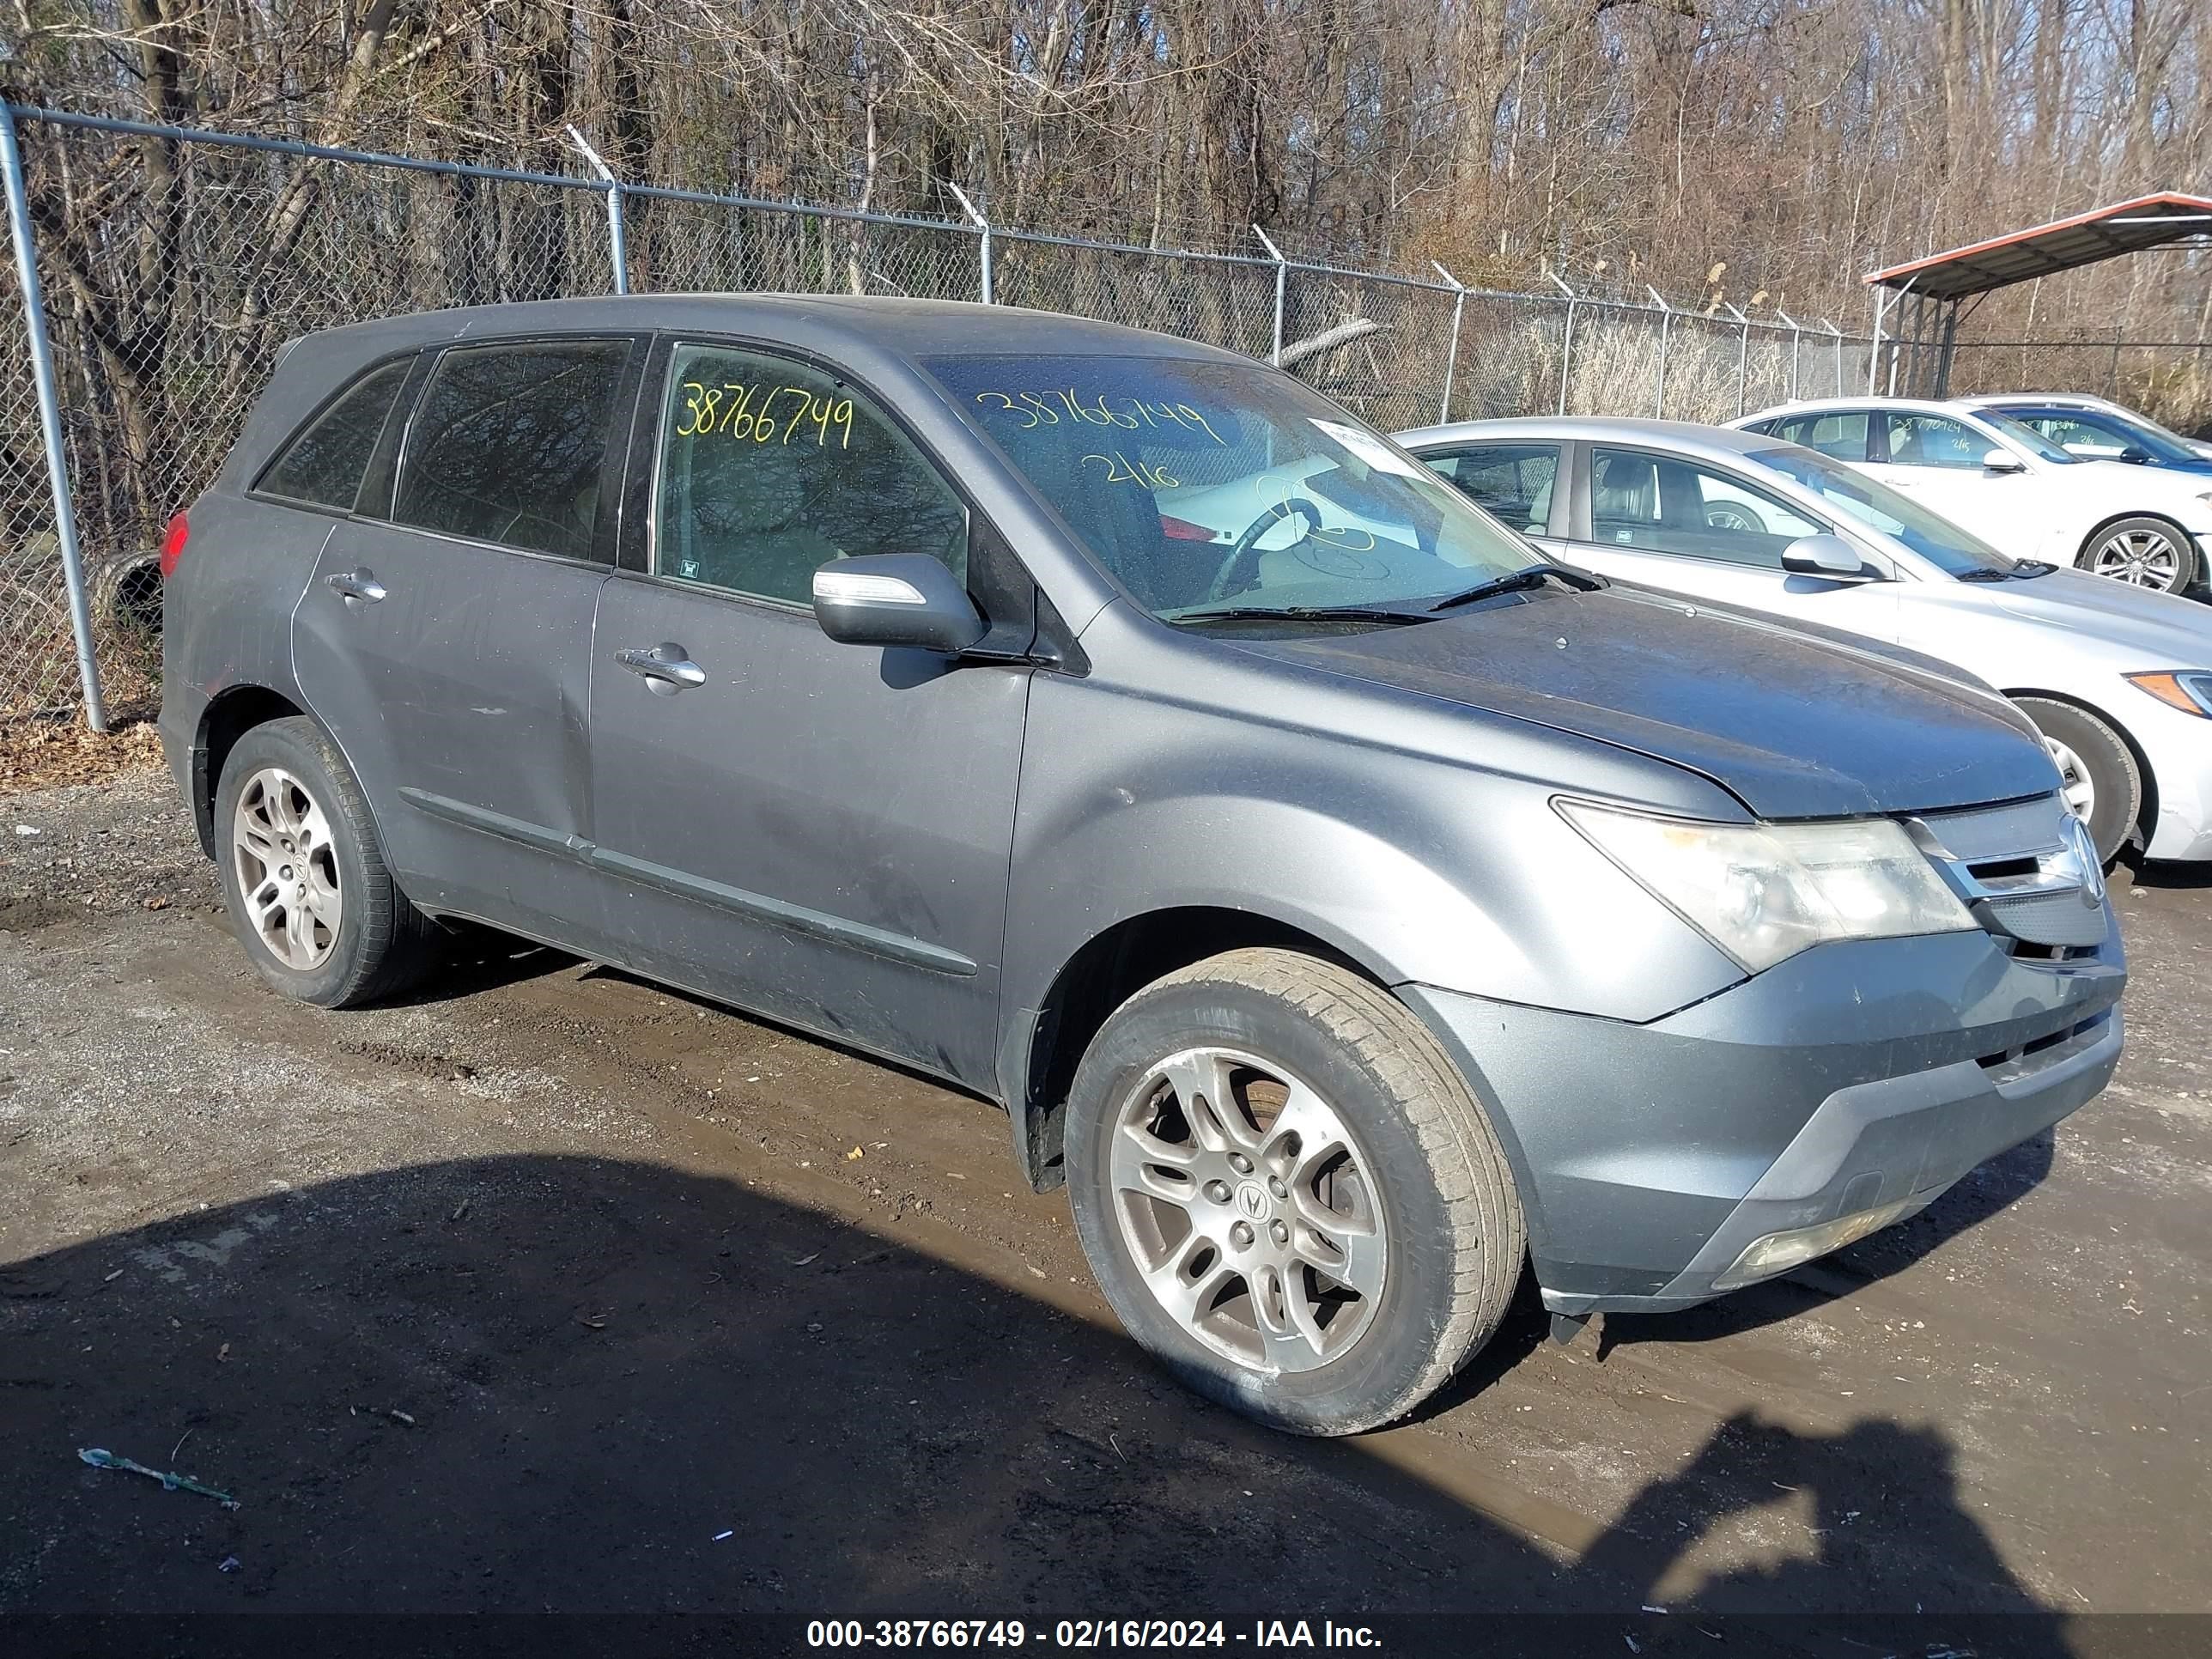 vin: 2HNYD28308H523618 2HNYD28308H523618 2008 acura mdx 3700 for Sale in 21222, 8143 Beachwood Road , Dundalk, USA